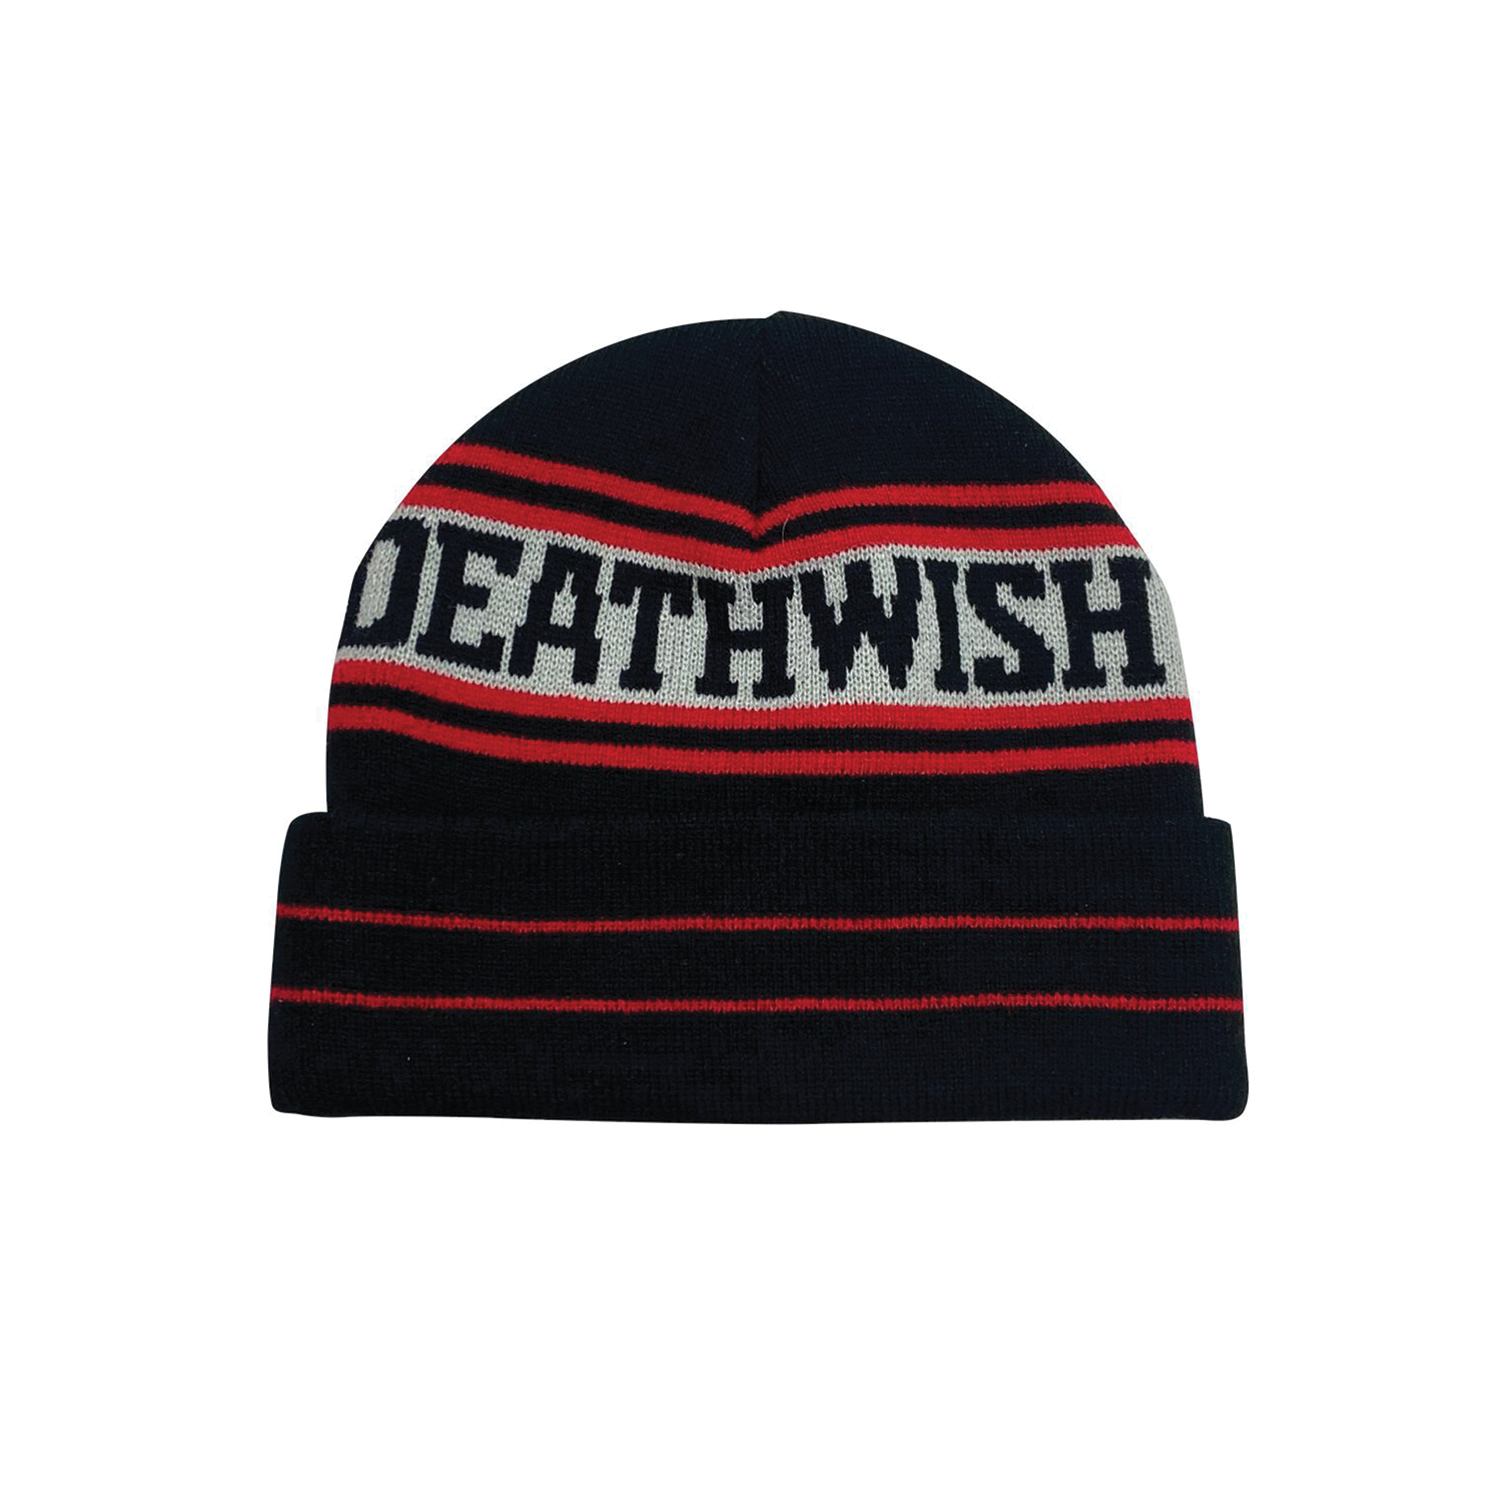 DEATHWISH SKATEBOARDS THE TRUTH BEANIE - BLACK/RED